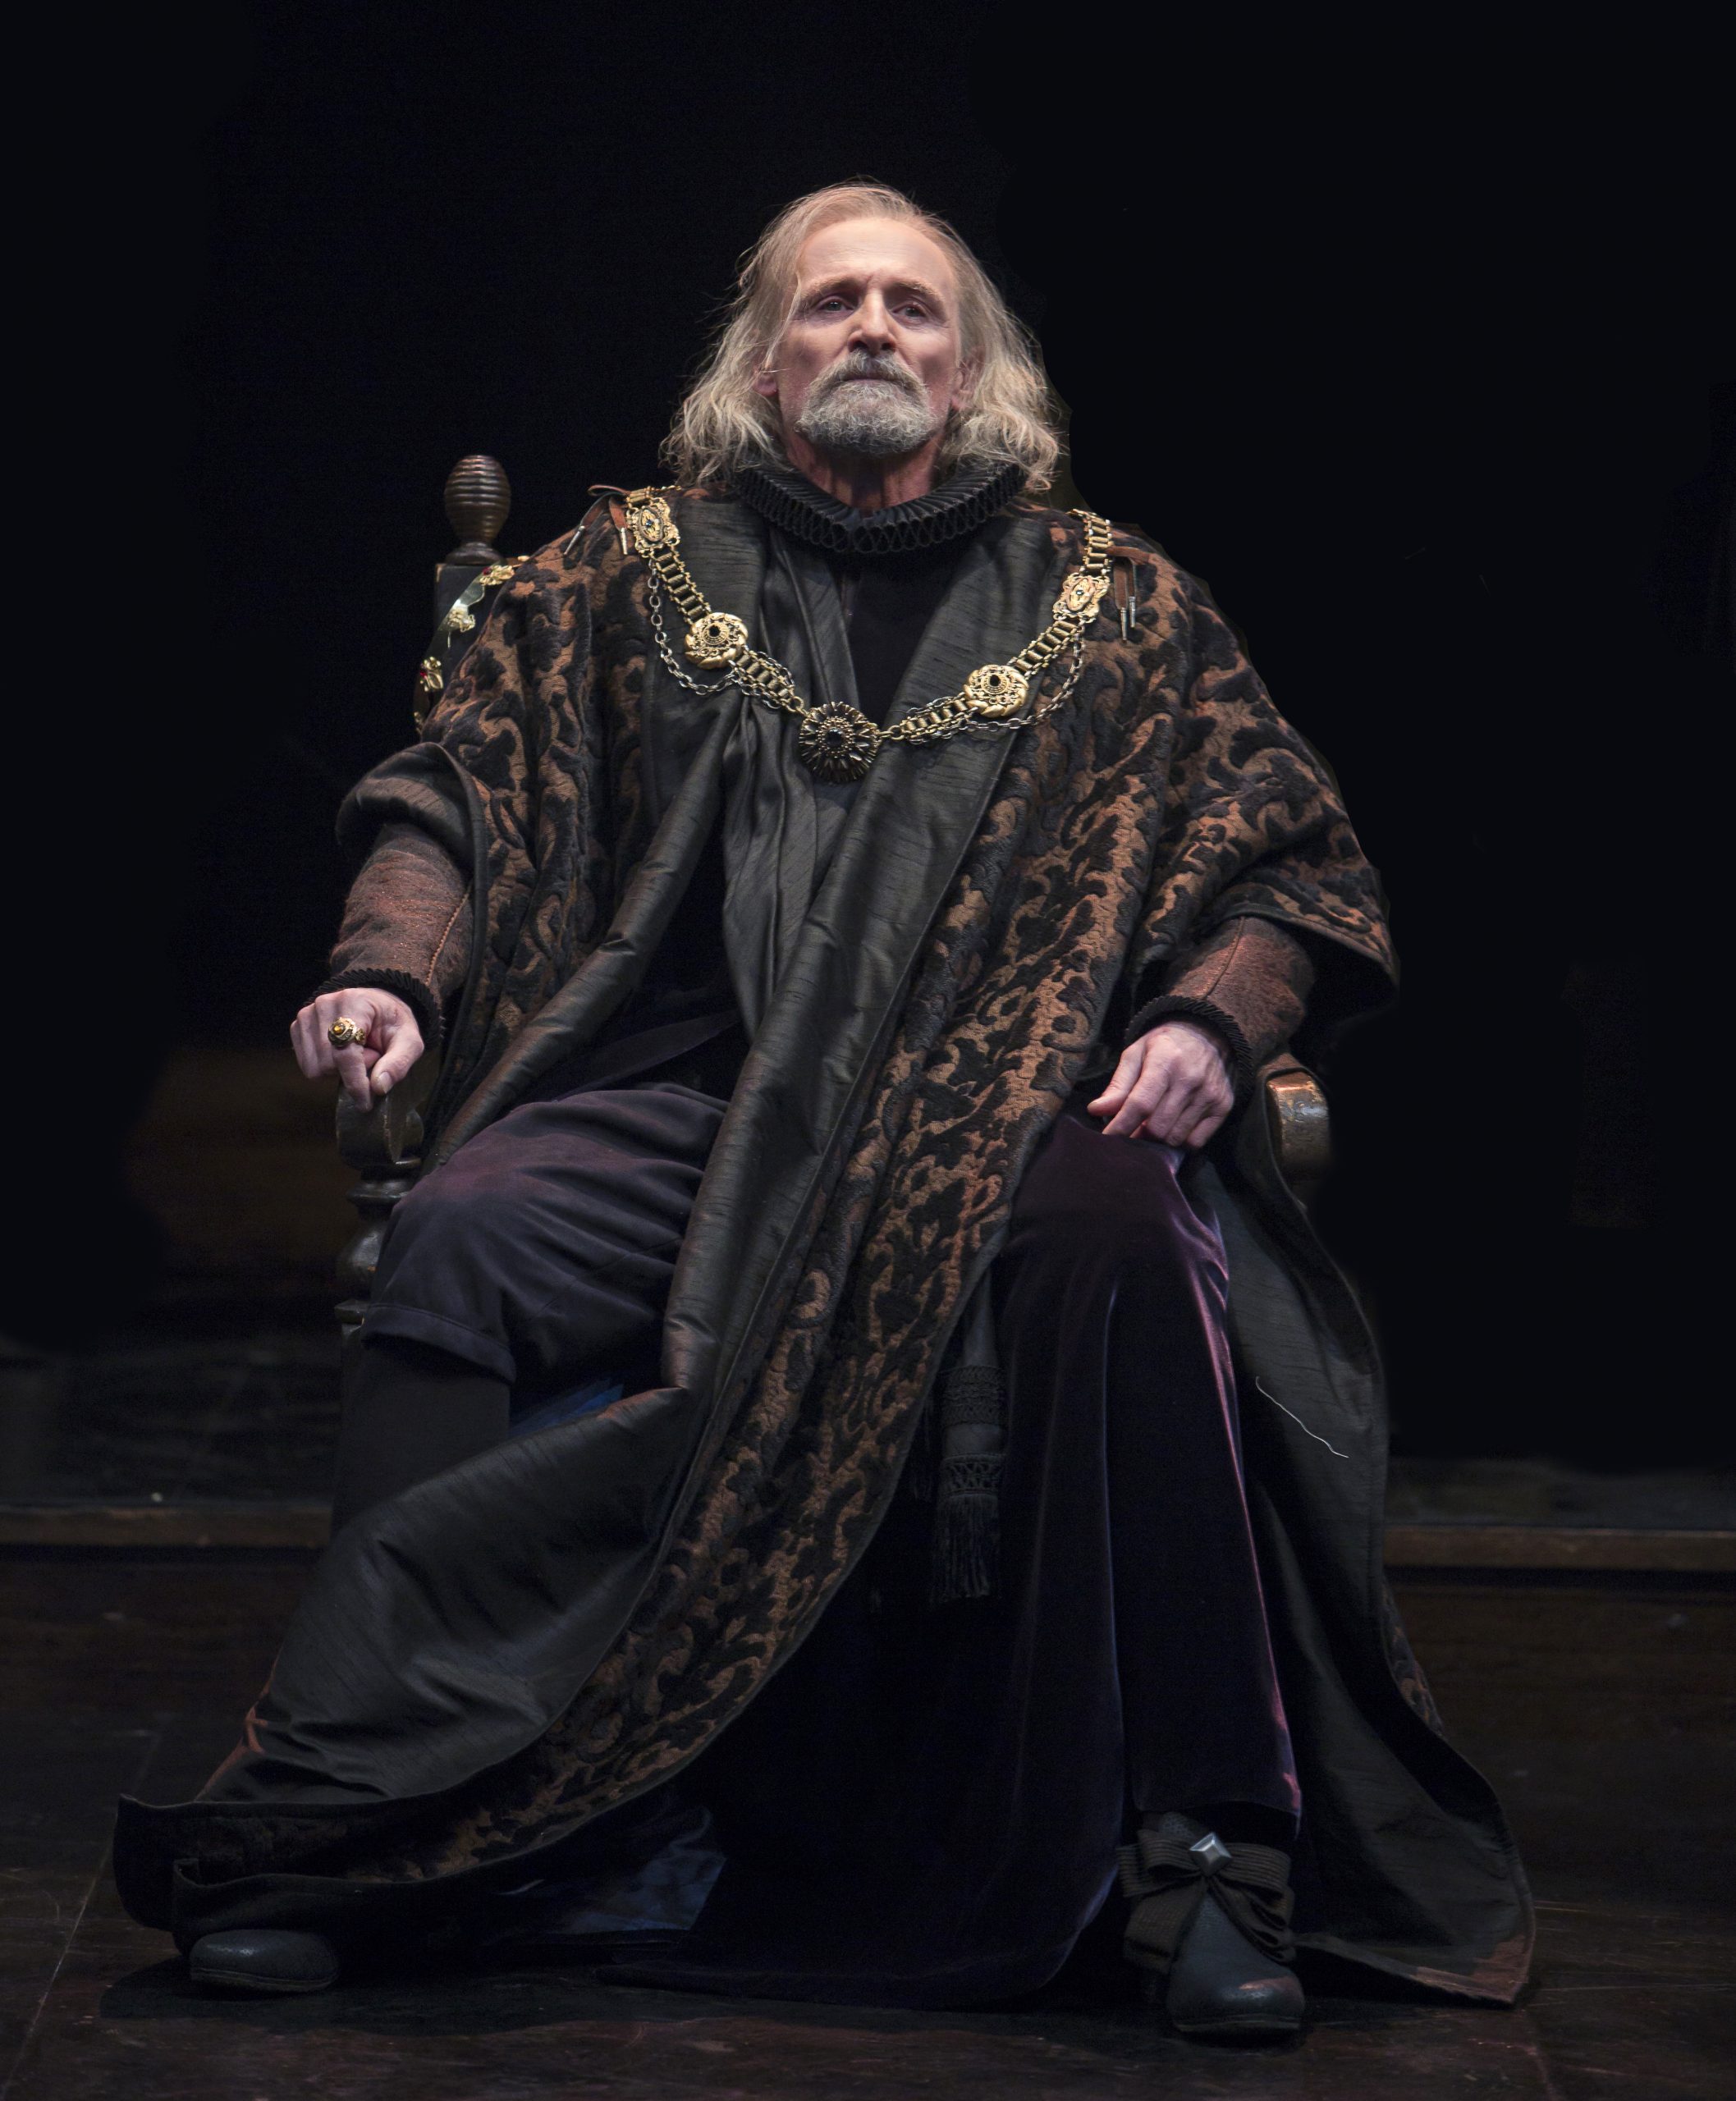 Colm Feore as King Lear in the Stratford Festival's King Lear (2014). Photography by David Hou.